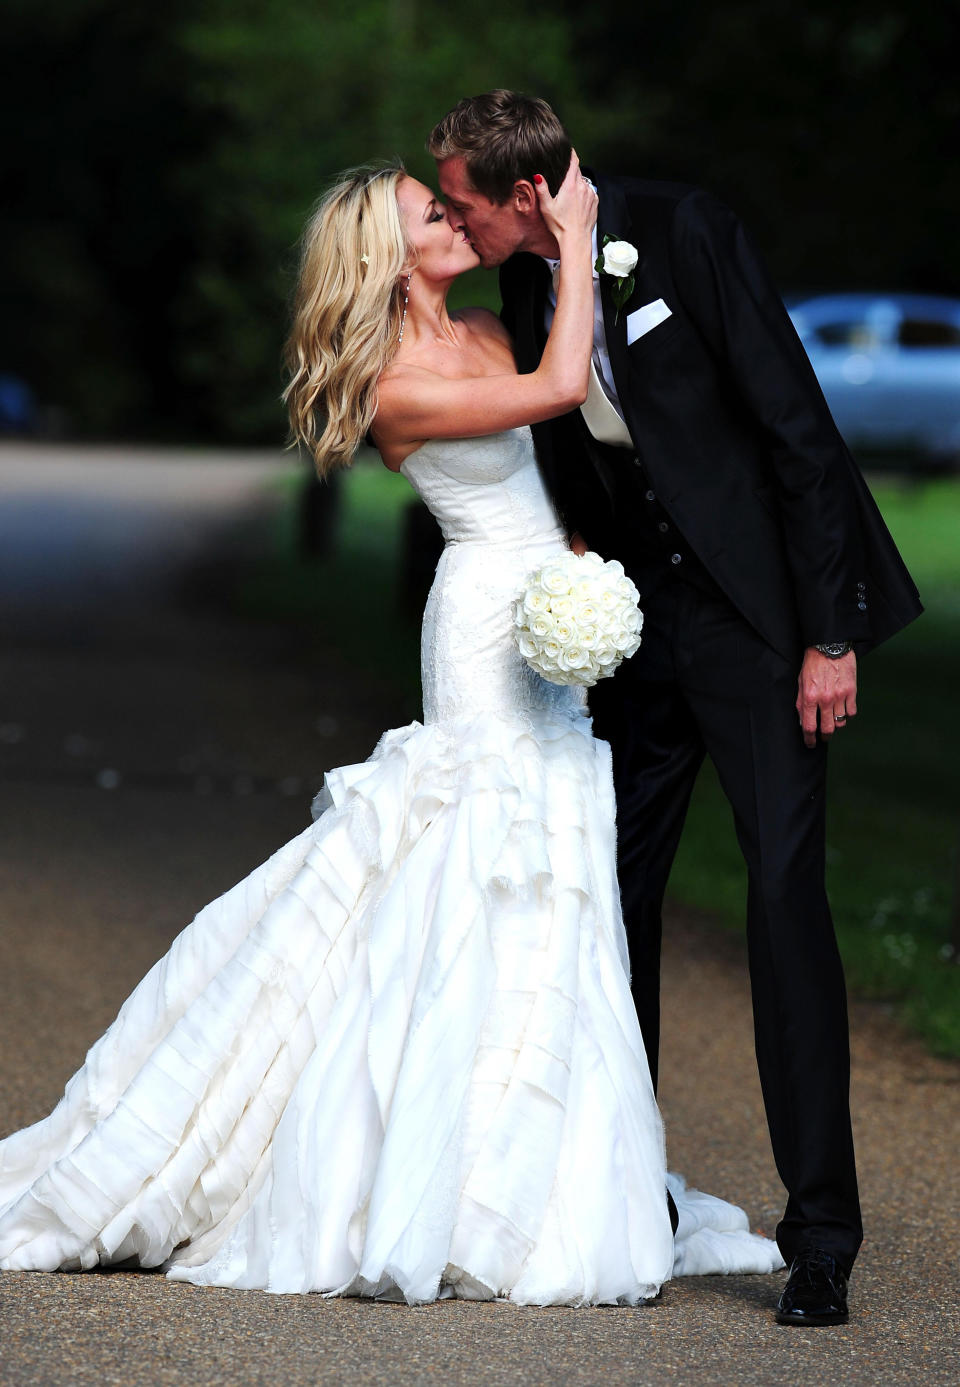 Footballer Peter Crouch and model Abbey Clancy in the grounds of Stapleford Park in Leicester following their wedding.